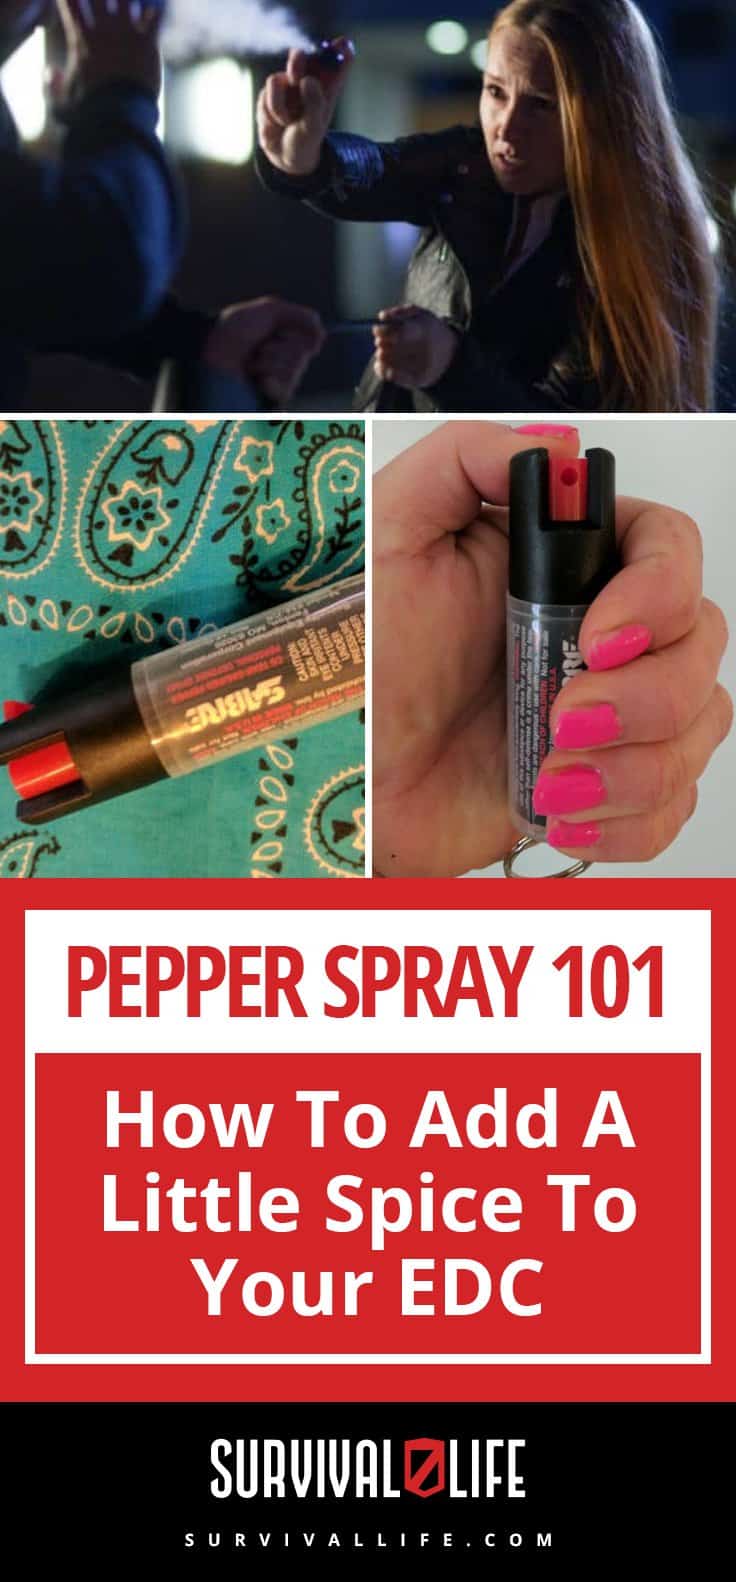 Pinterest Placard | Pepper Spray 101: How To Add A Little Spice To Your EDC | Buy Pepper Spray